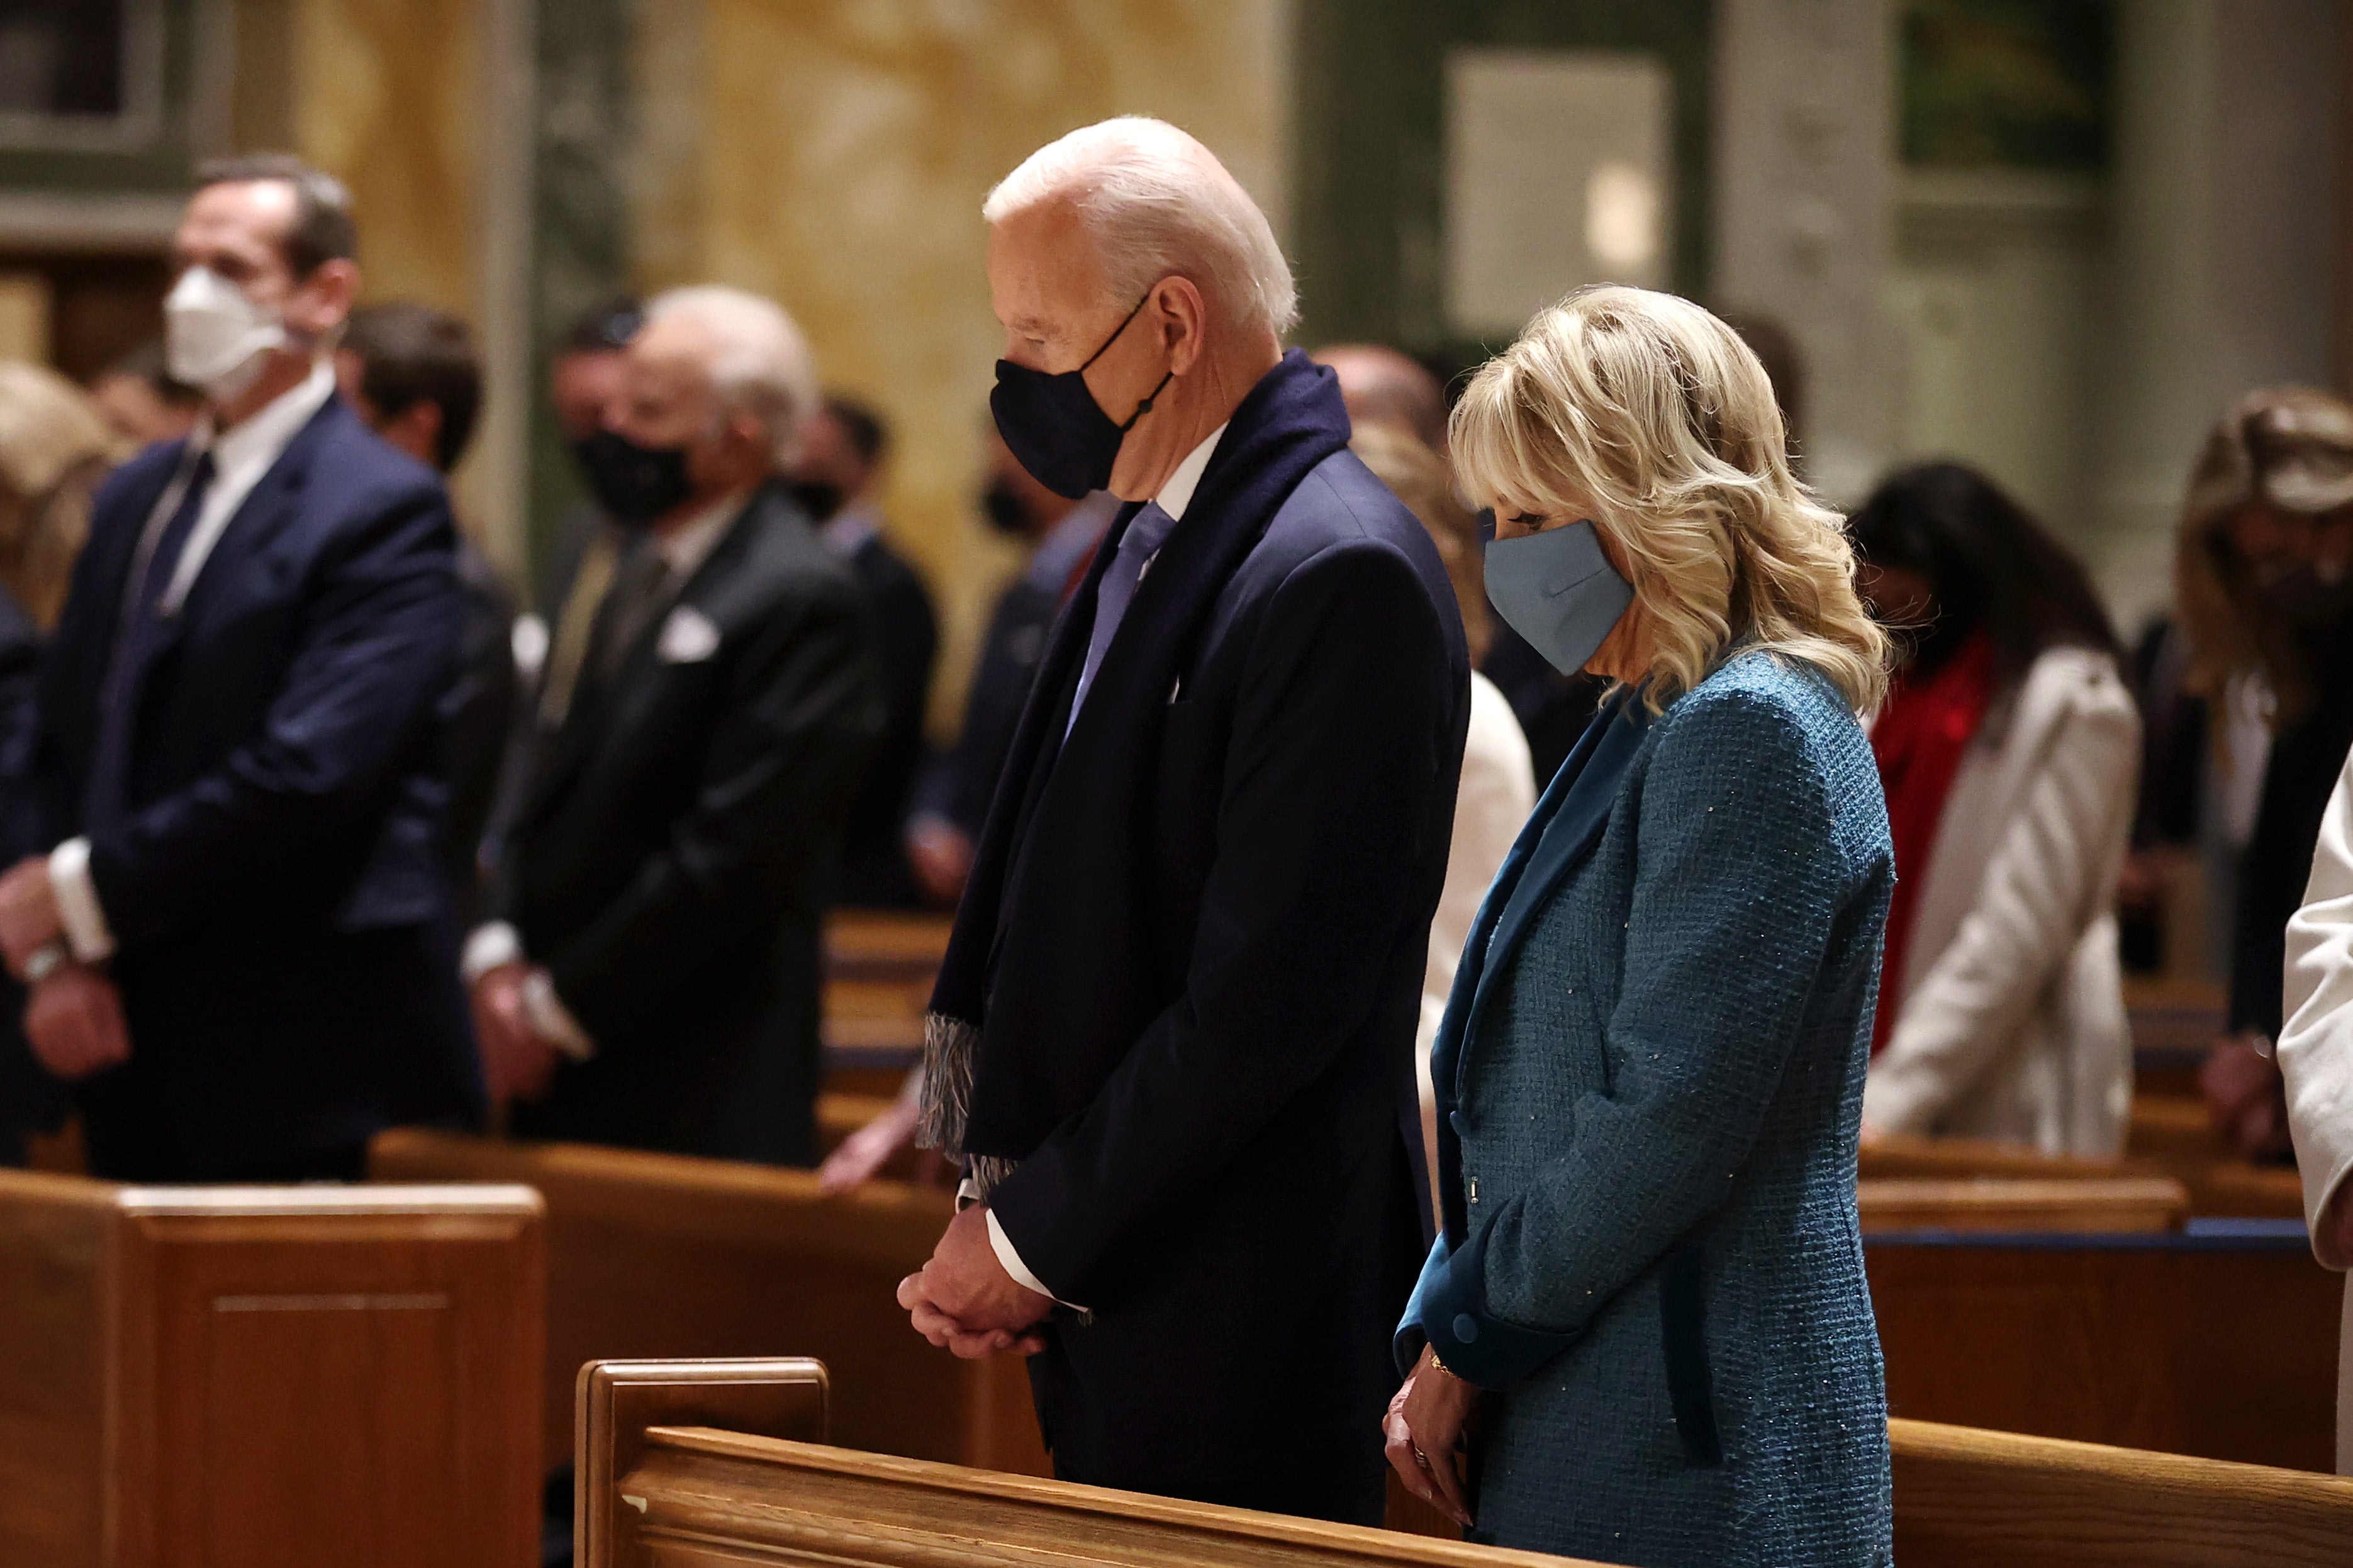 President Joe Biden may be disallowed to take Communion following an upcoming vote by the US Conference of Catholic Bishops.